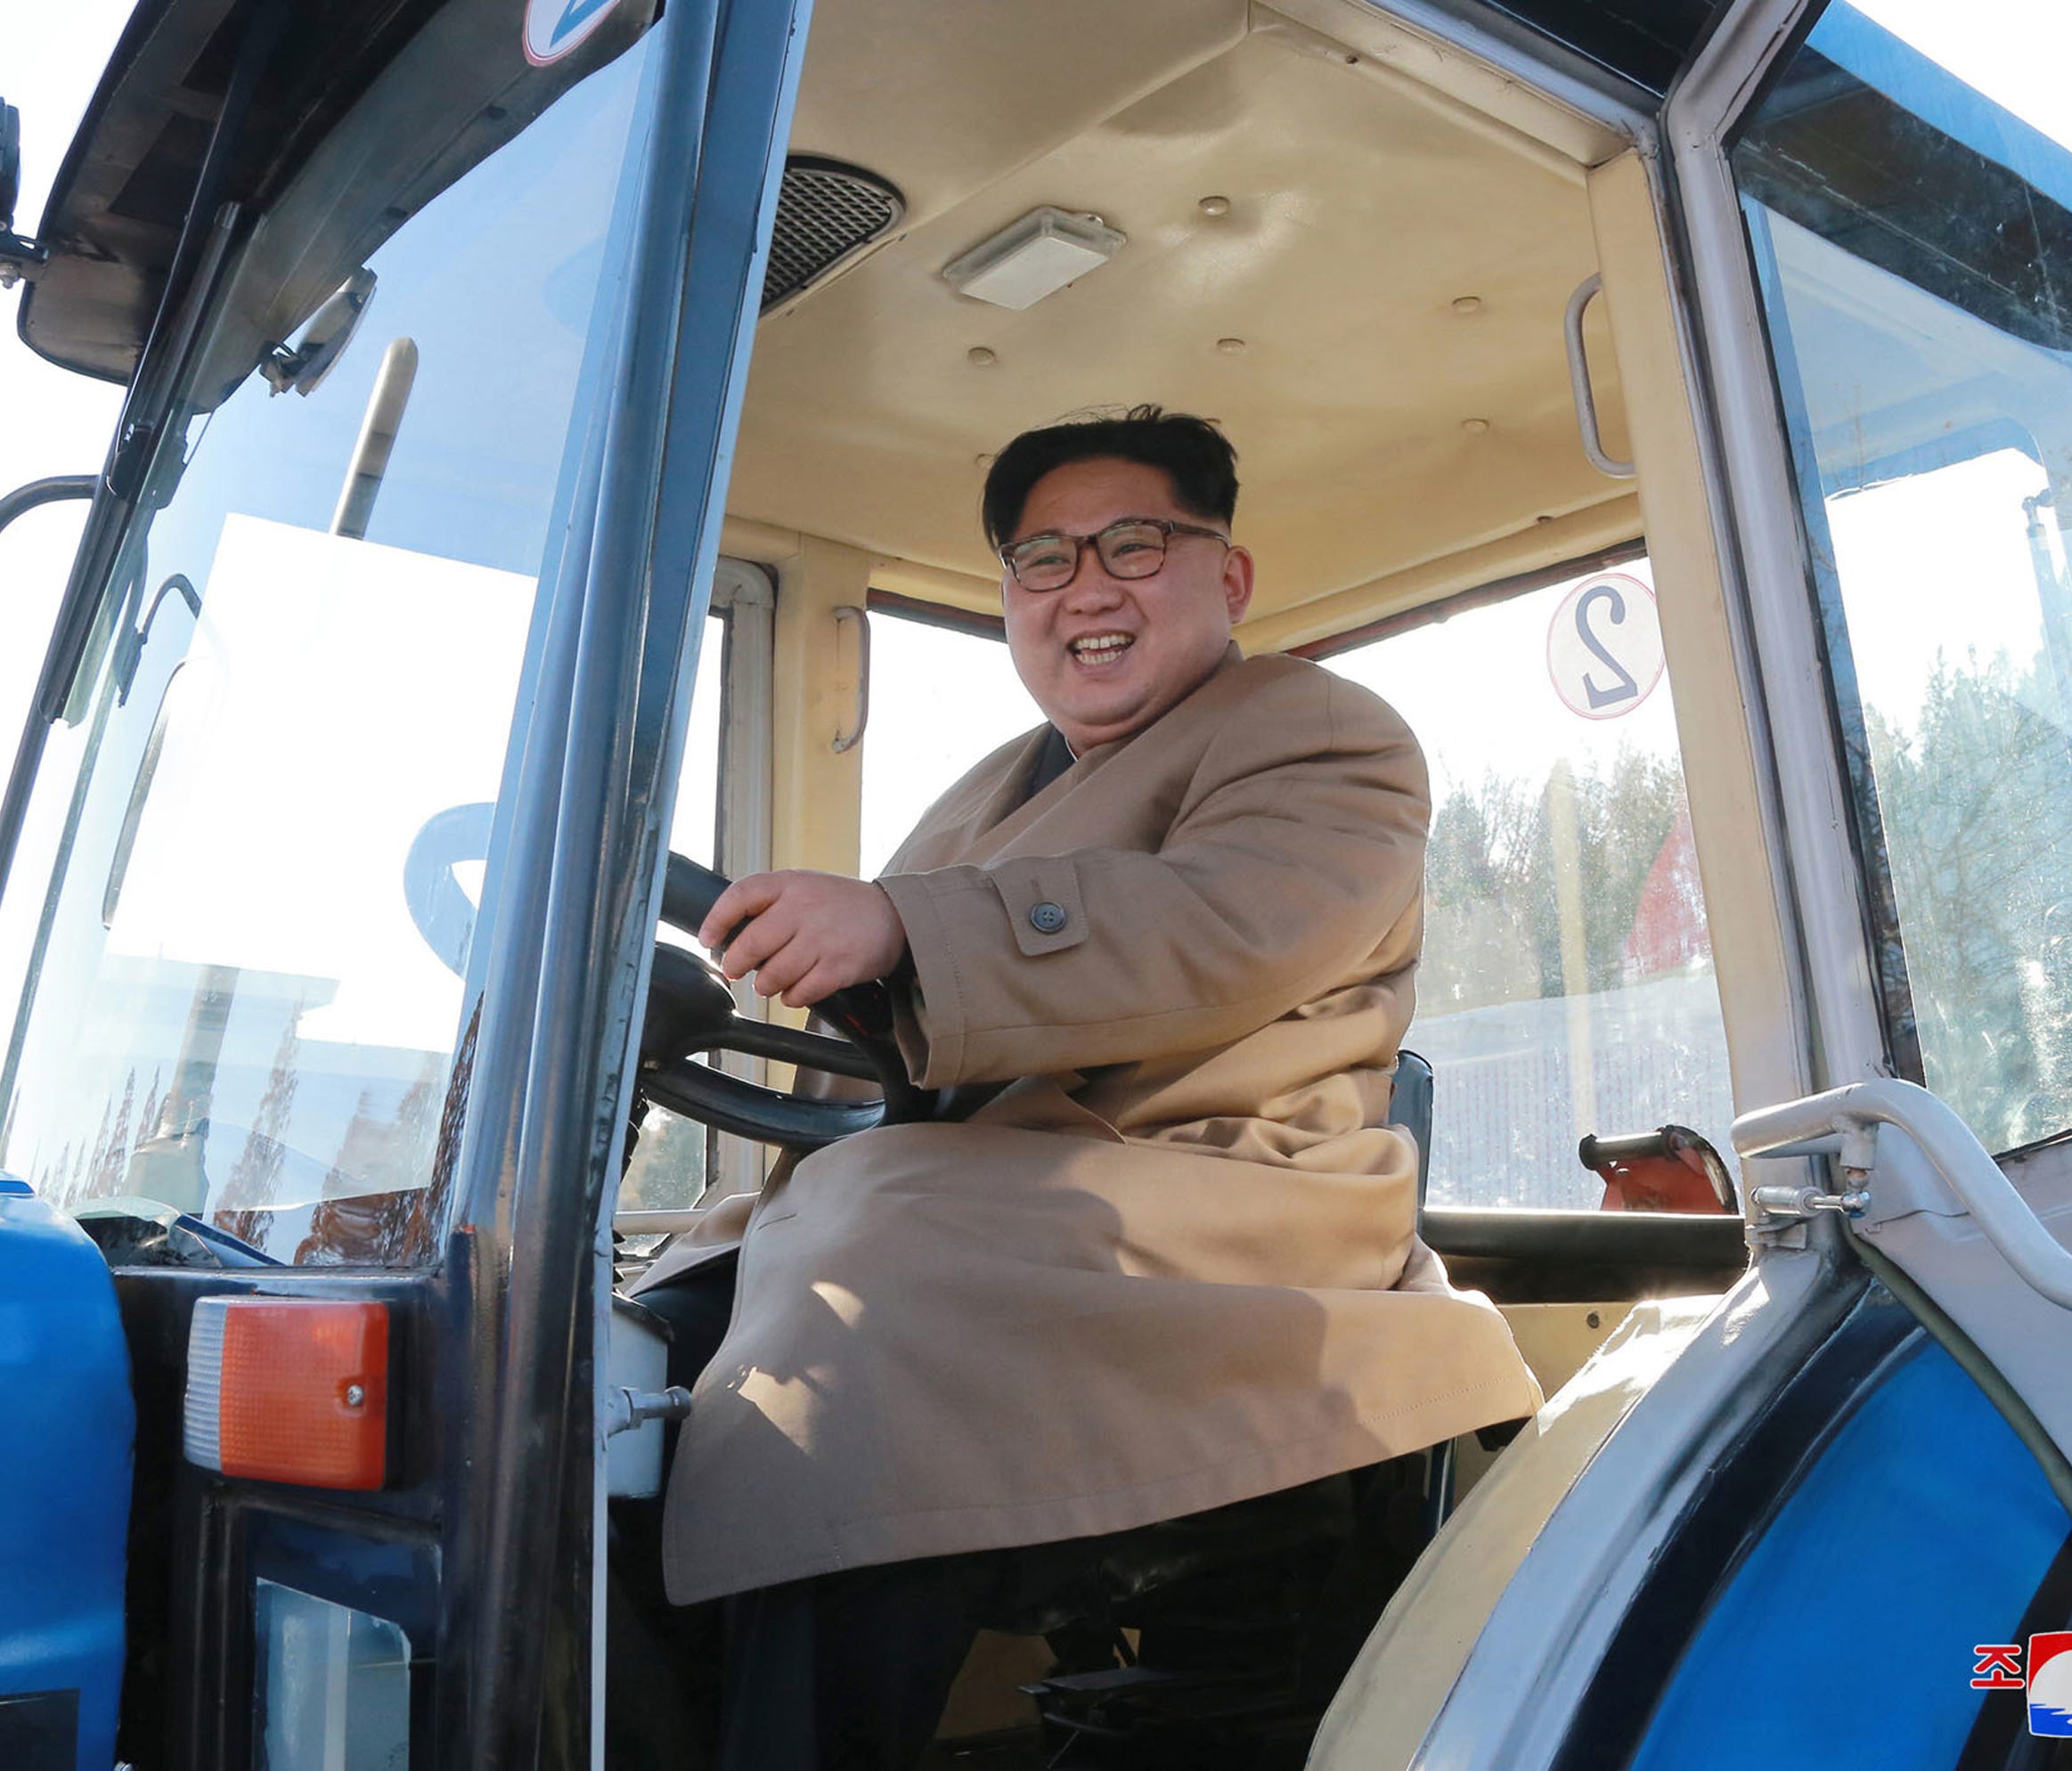 In this undated photo provided on Wednesday, Nov. 15, 2017, by the North Korean government, North Korean leader Kim Jong Un sits in a tractor at the Kumsong Tractor Factory, in Nampo, North Korea. Independent journalists were not given access to cove